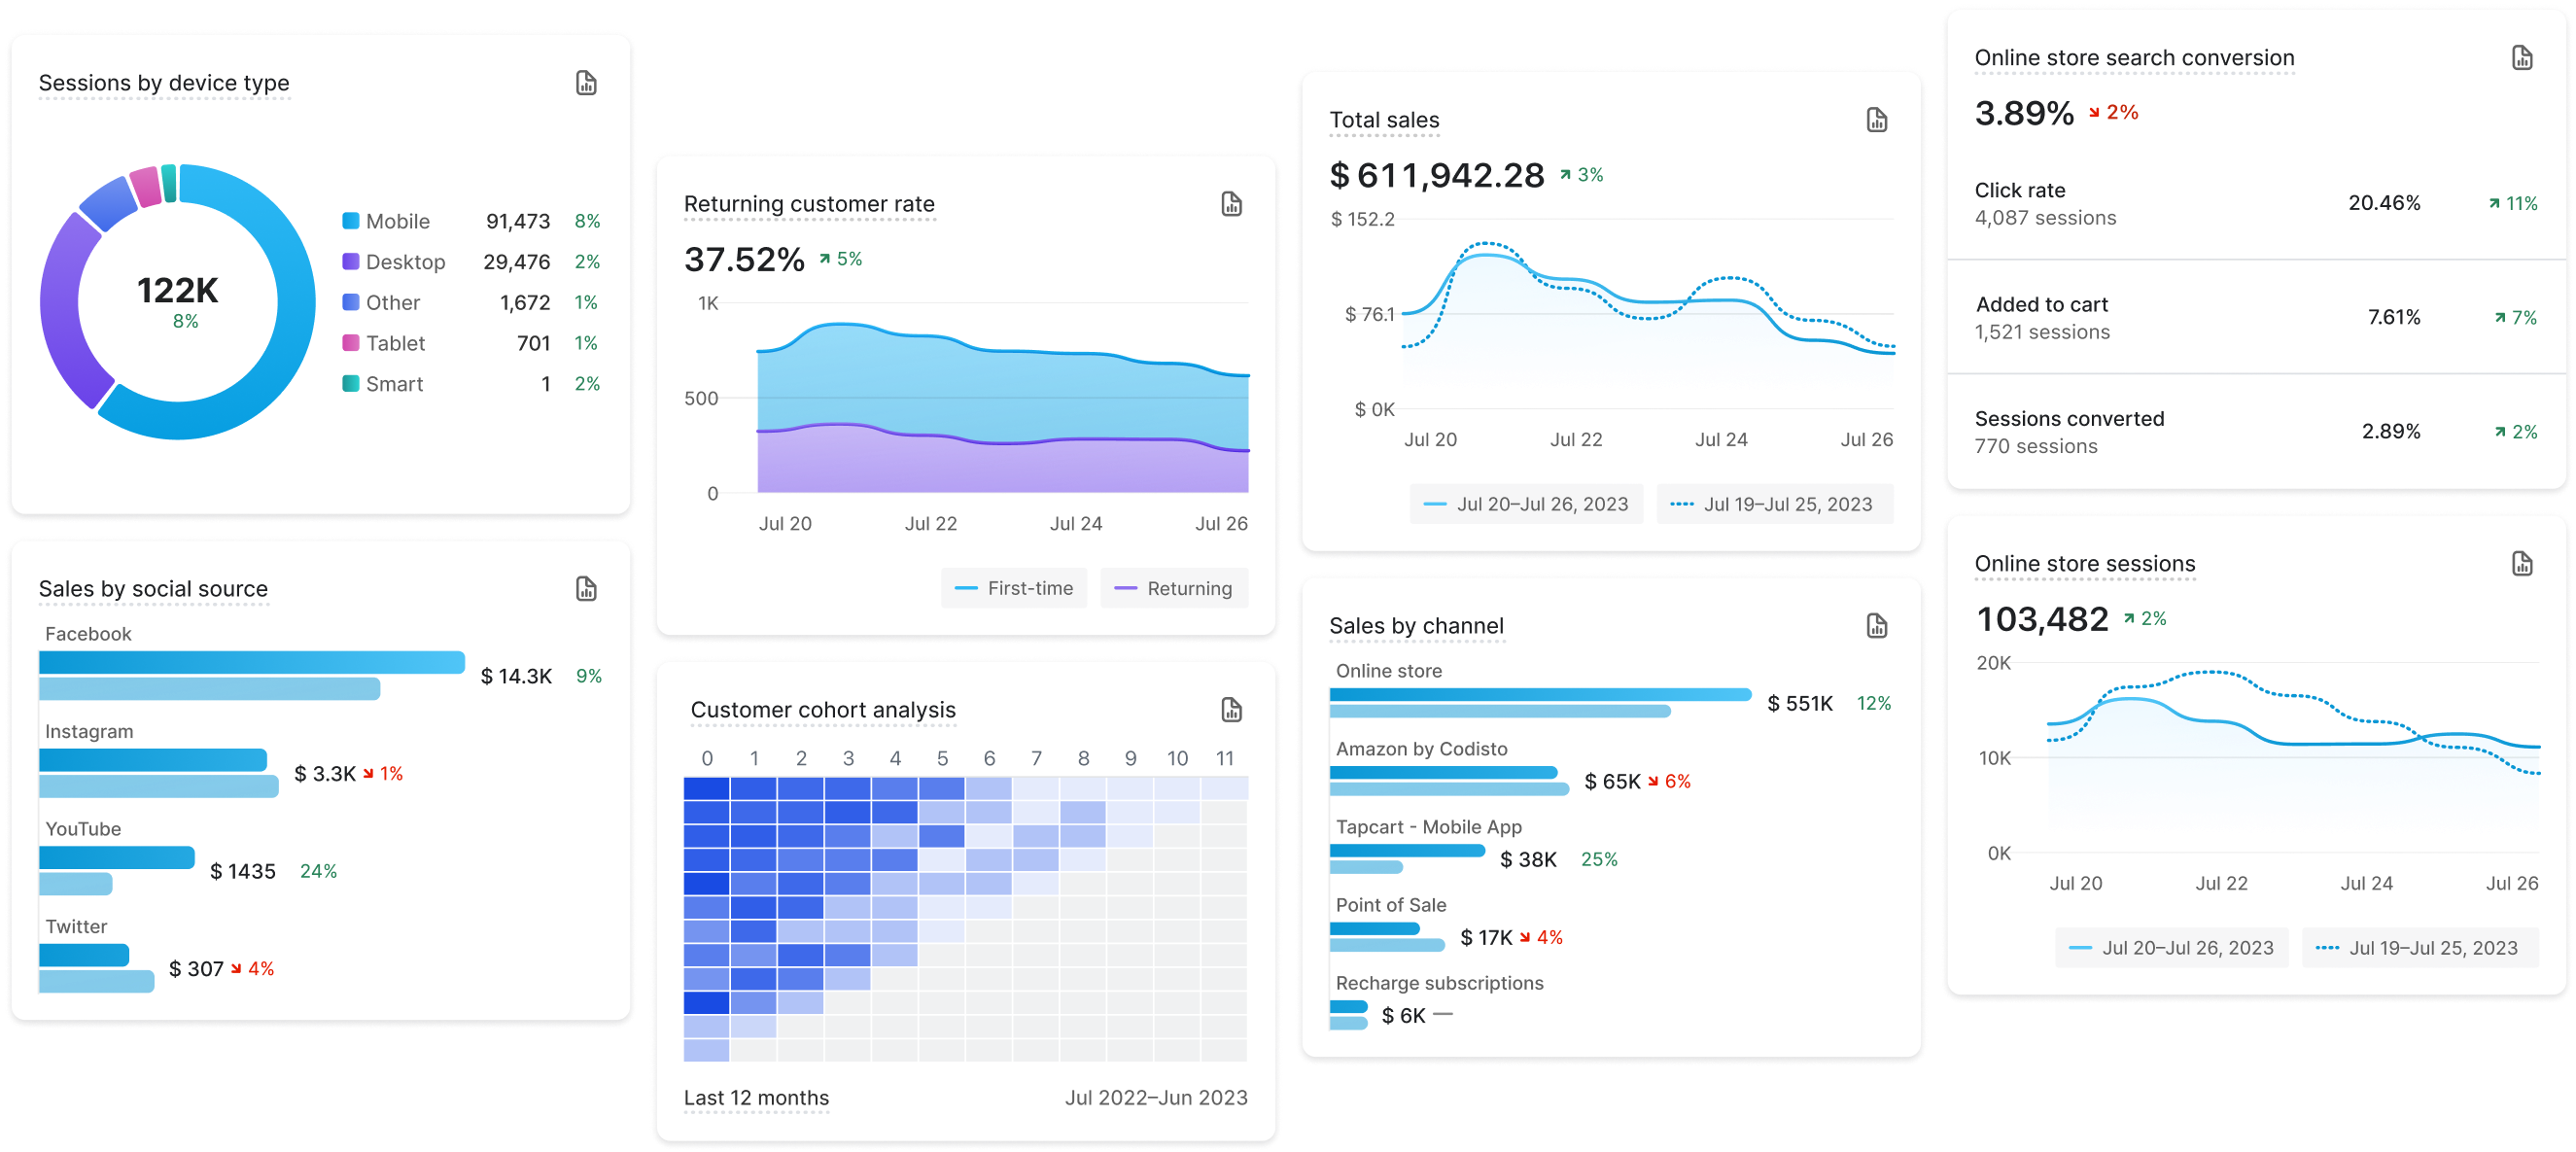 A showcase of metrics available on the analytics dashboard and Live View, including total sales, top products sold, predicted spend tier, sessions, average order value, conversion rate, and top locations.